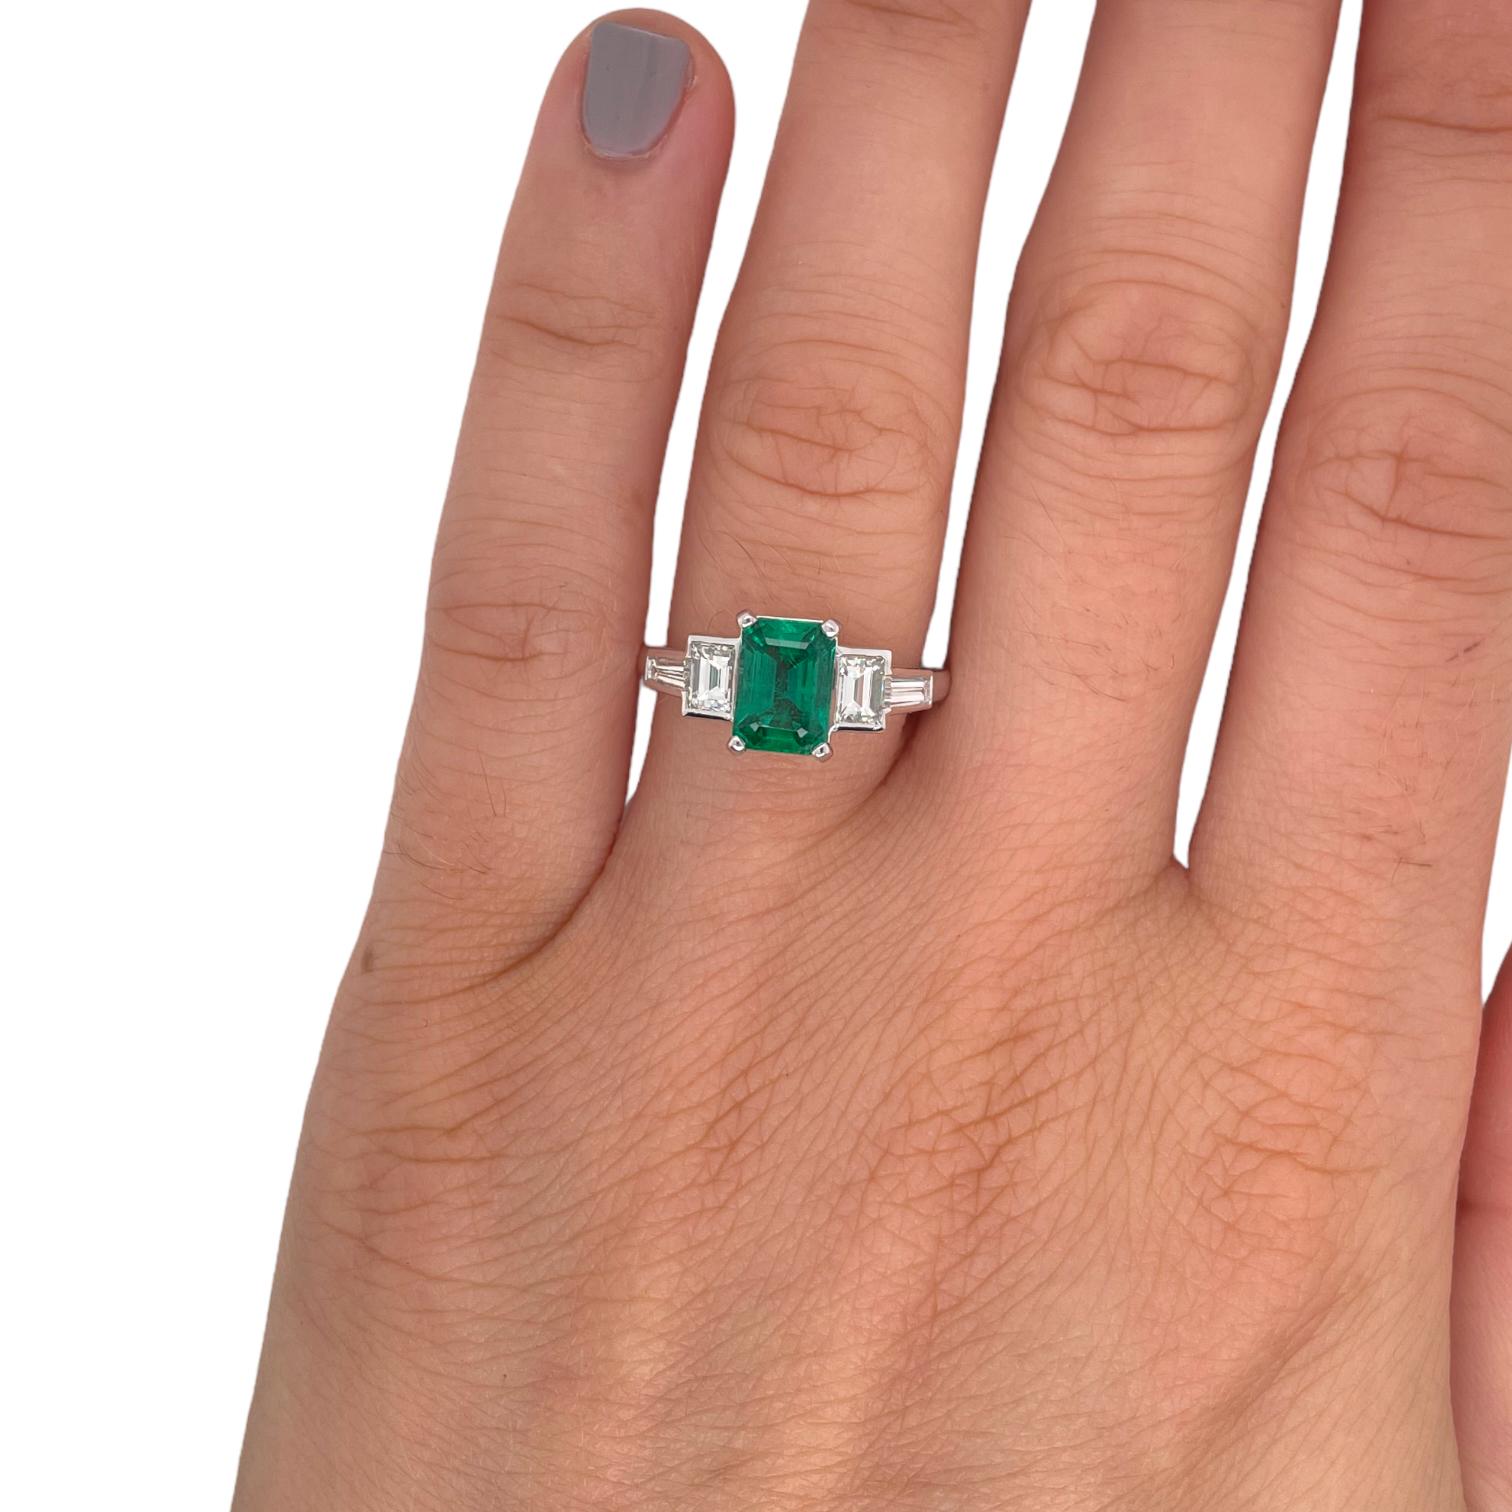 Ring contains one center emerald shape emerald 1.25ct, two straight baguette diamonds and two tapered baguettes, 0.78tcw. Diamonds are G in color and VS2 in clarity. Center stone is mounted in a handmade basket prong setting and side diamonds are